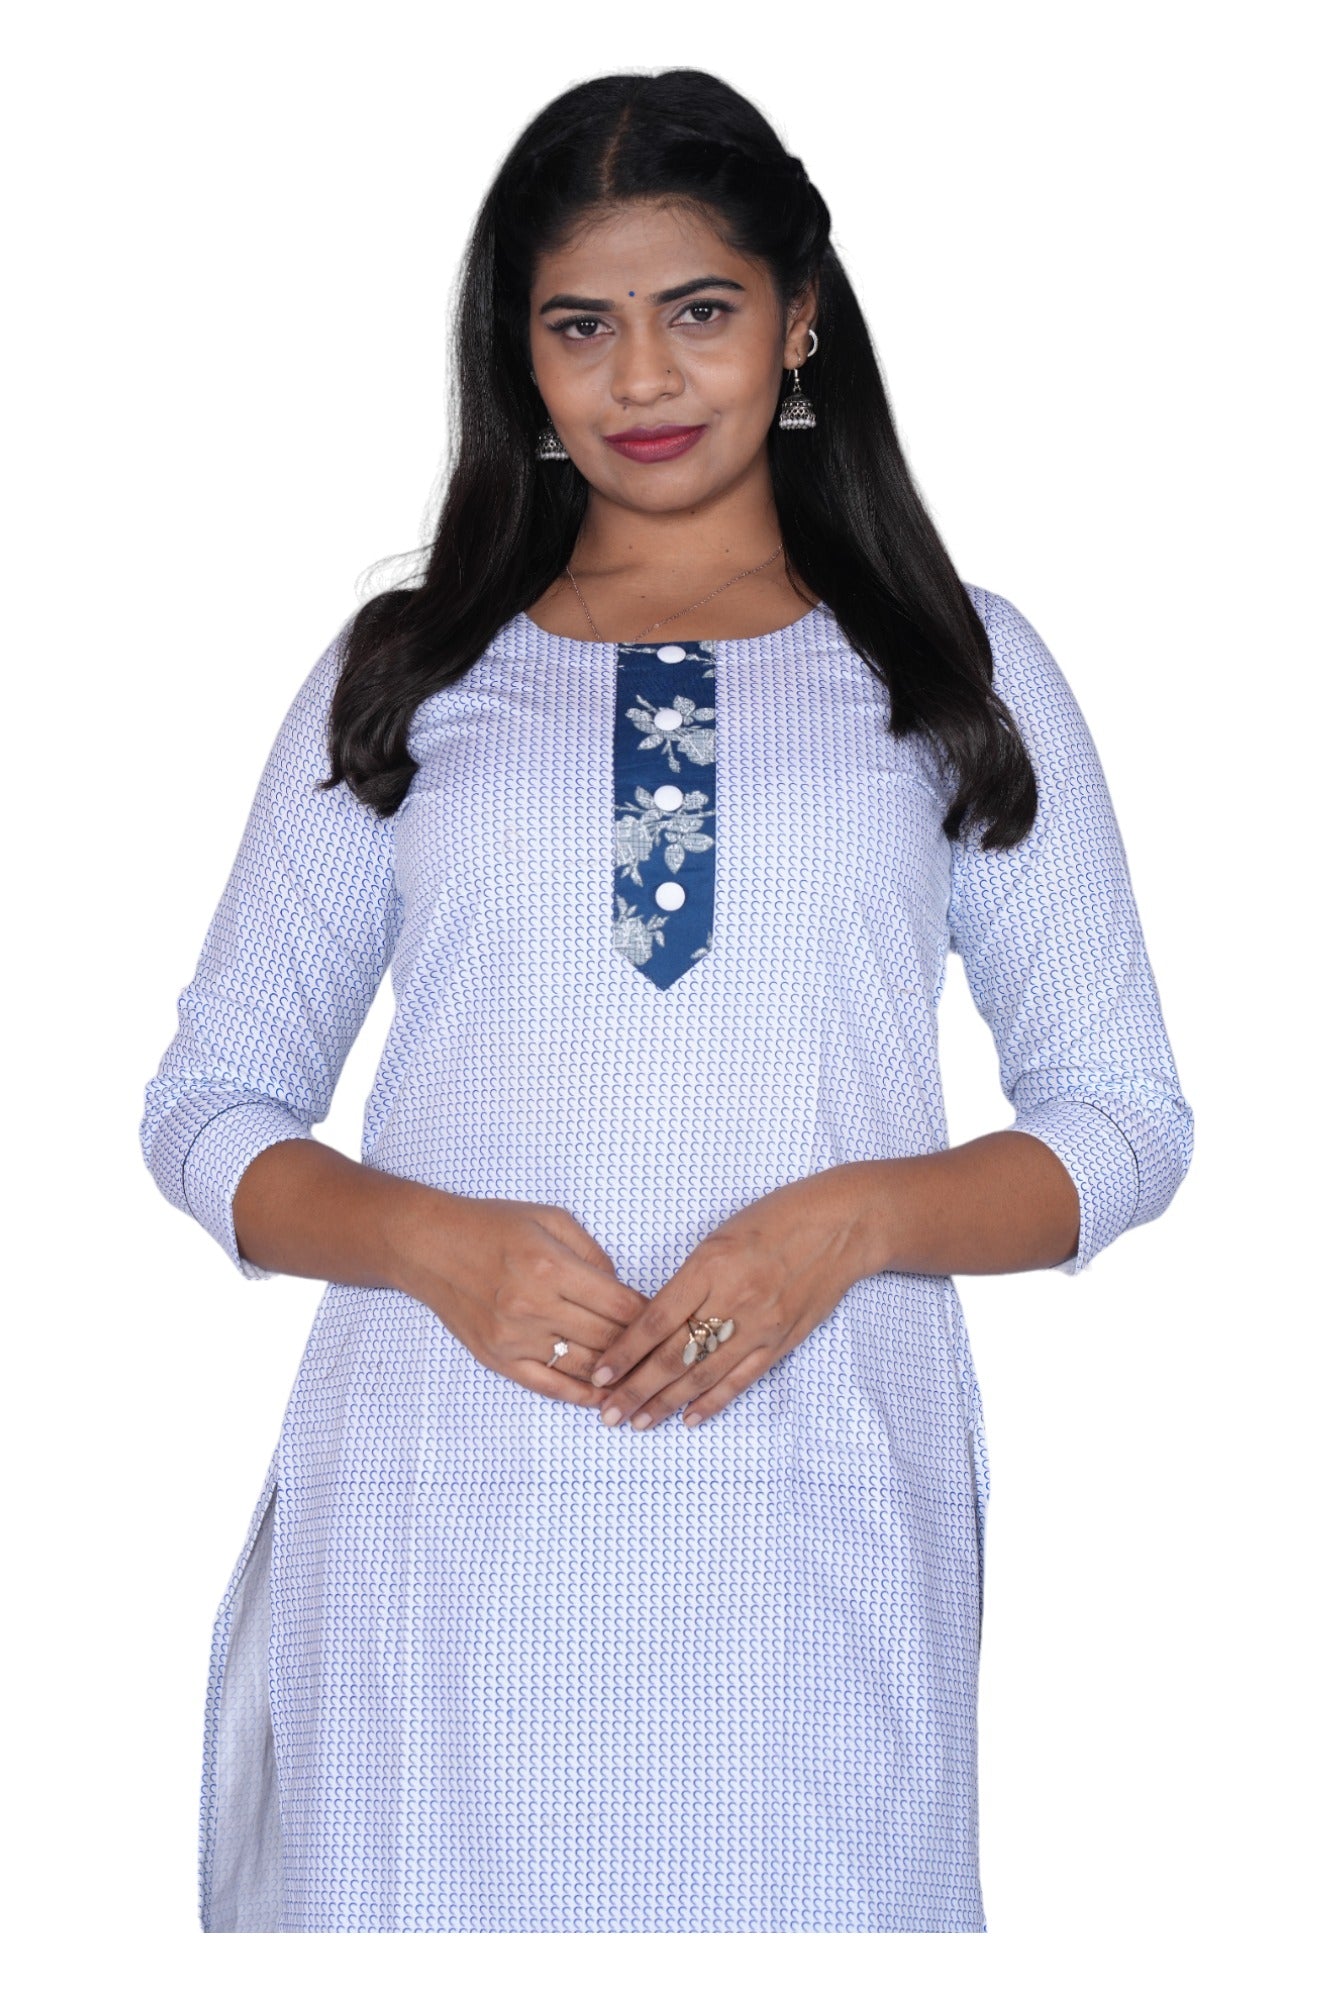 Daily Wear Cotton Kurtis For Your Style, Comfort and Fashion Functionality  | Kalki Fashion Blogs